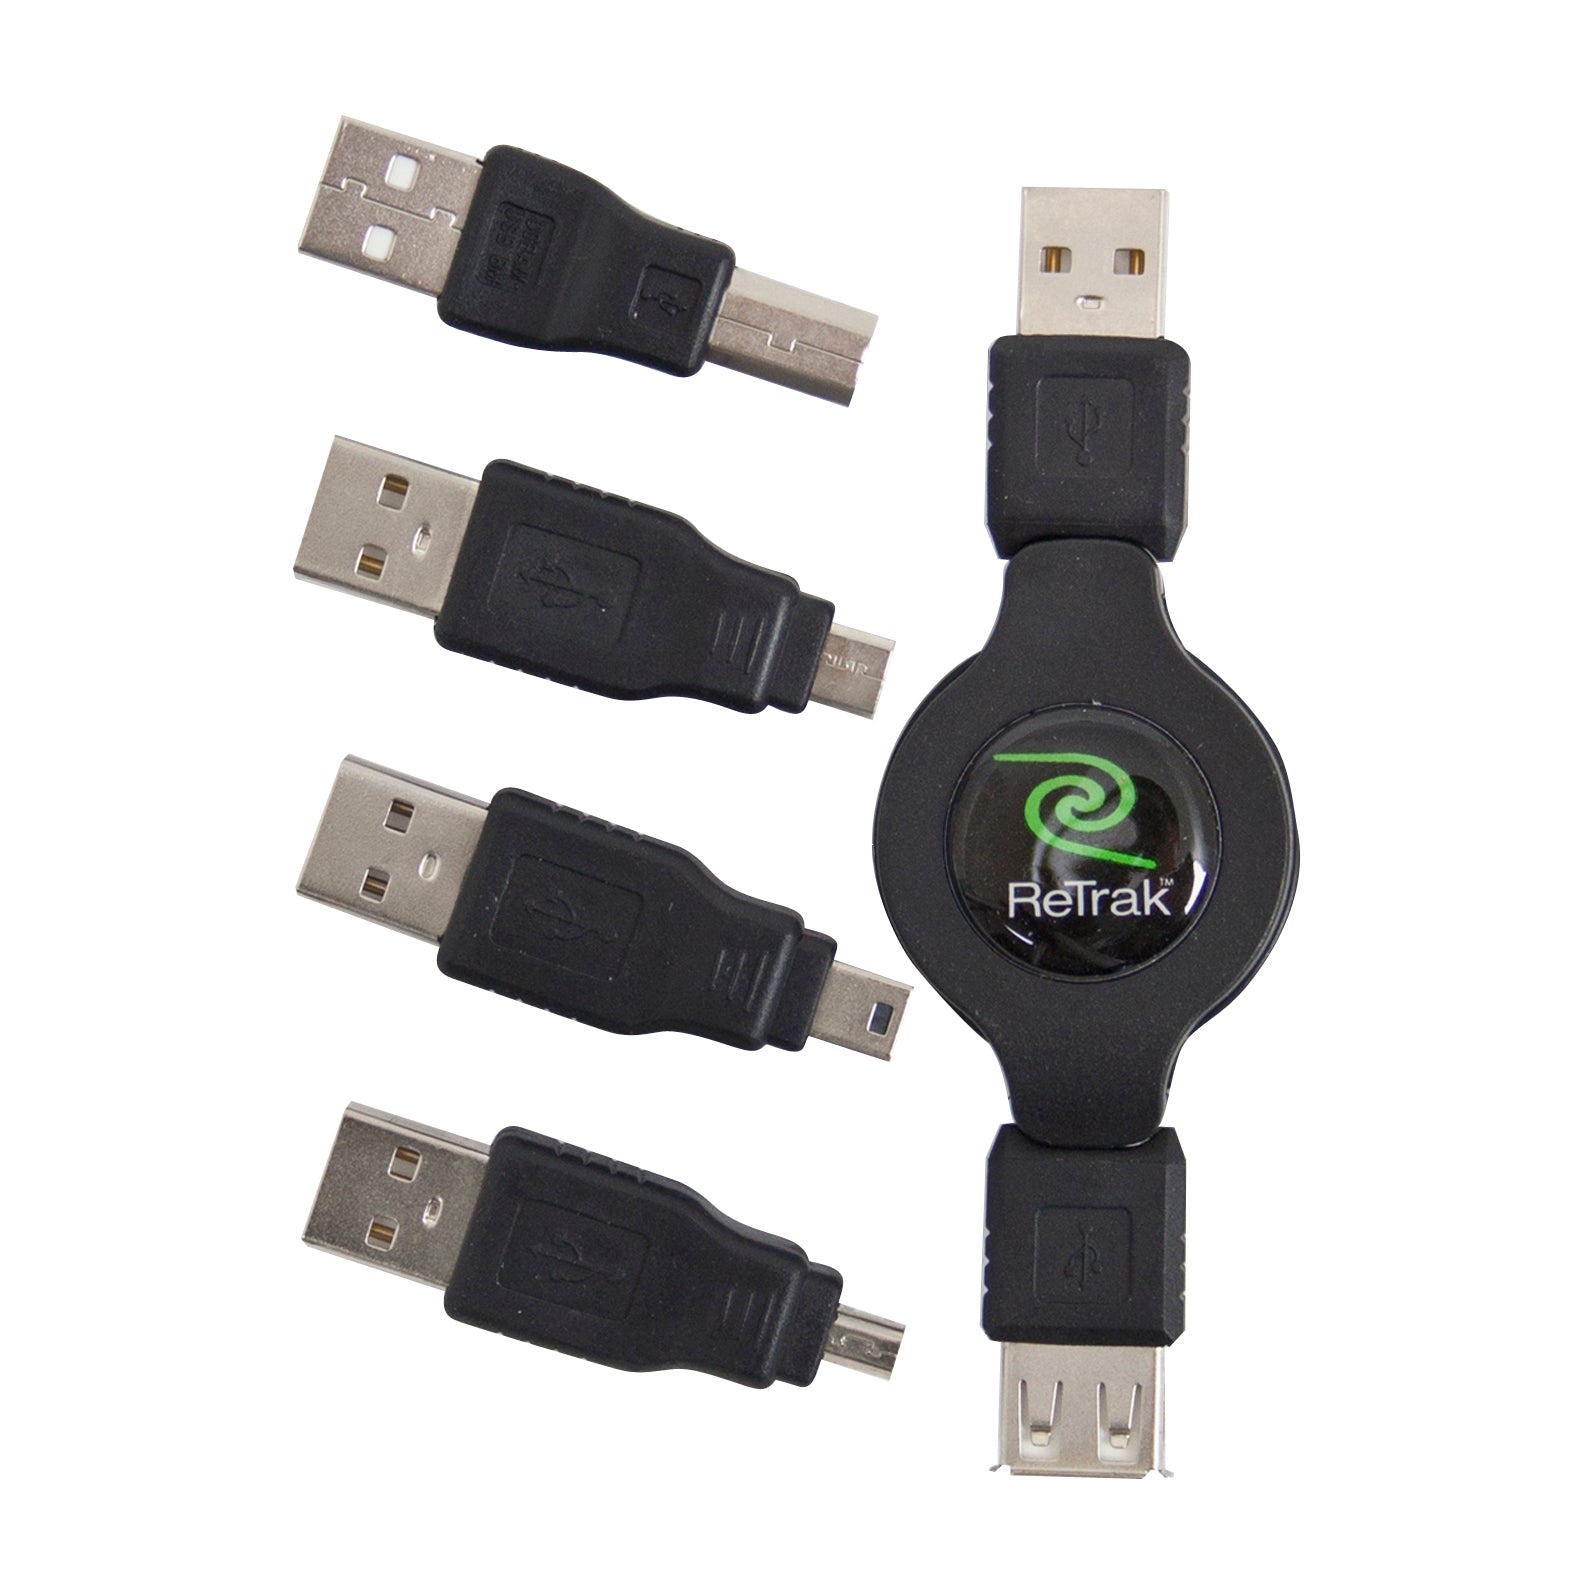 USB Universal Extension Cable | 3 Adapters - USB B, Micro 5, and Mini 5 | Retractable Cable